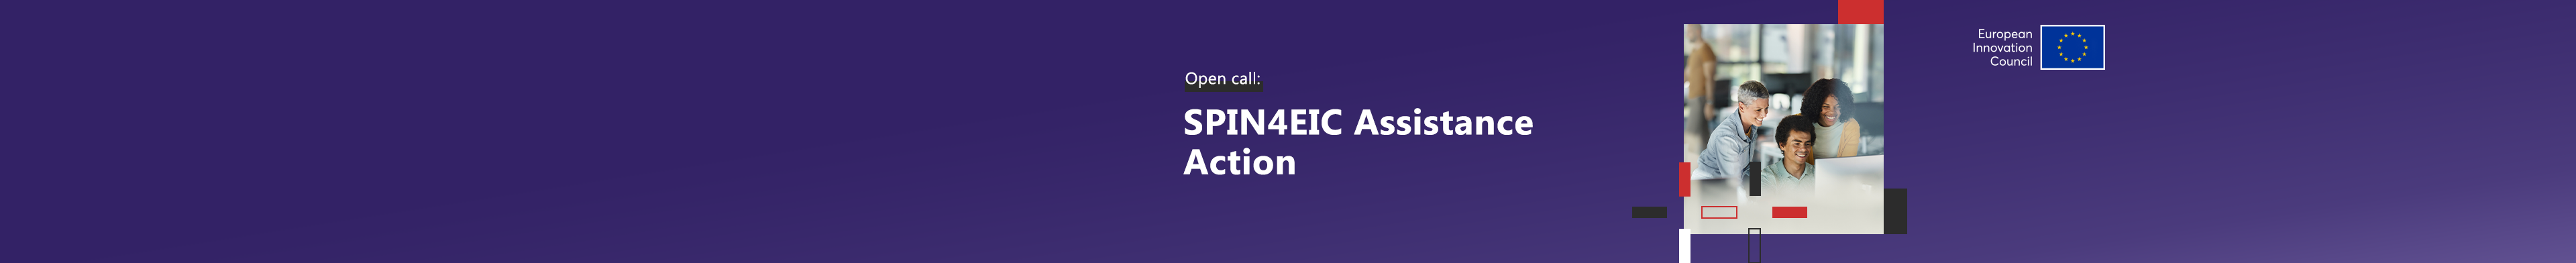 SPIN4EIC assistance action banner